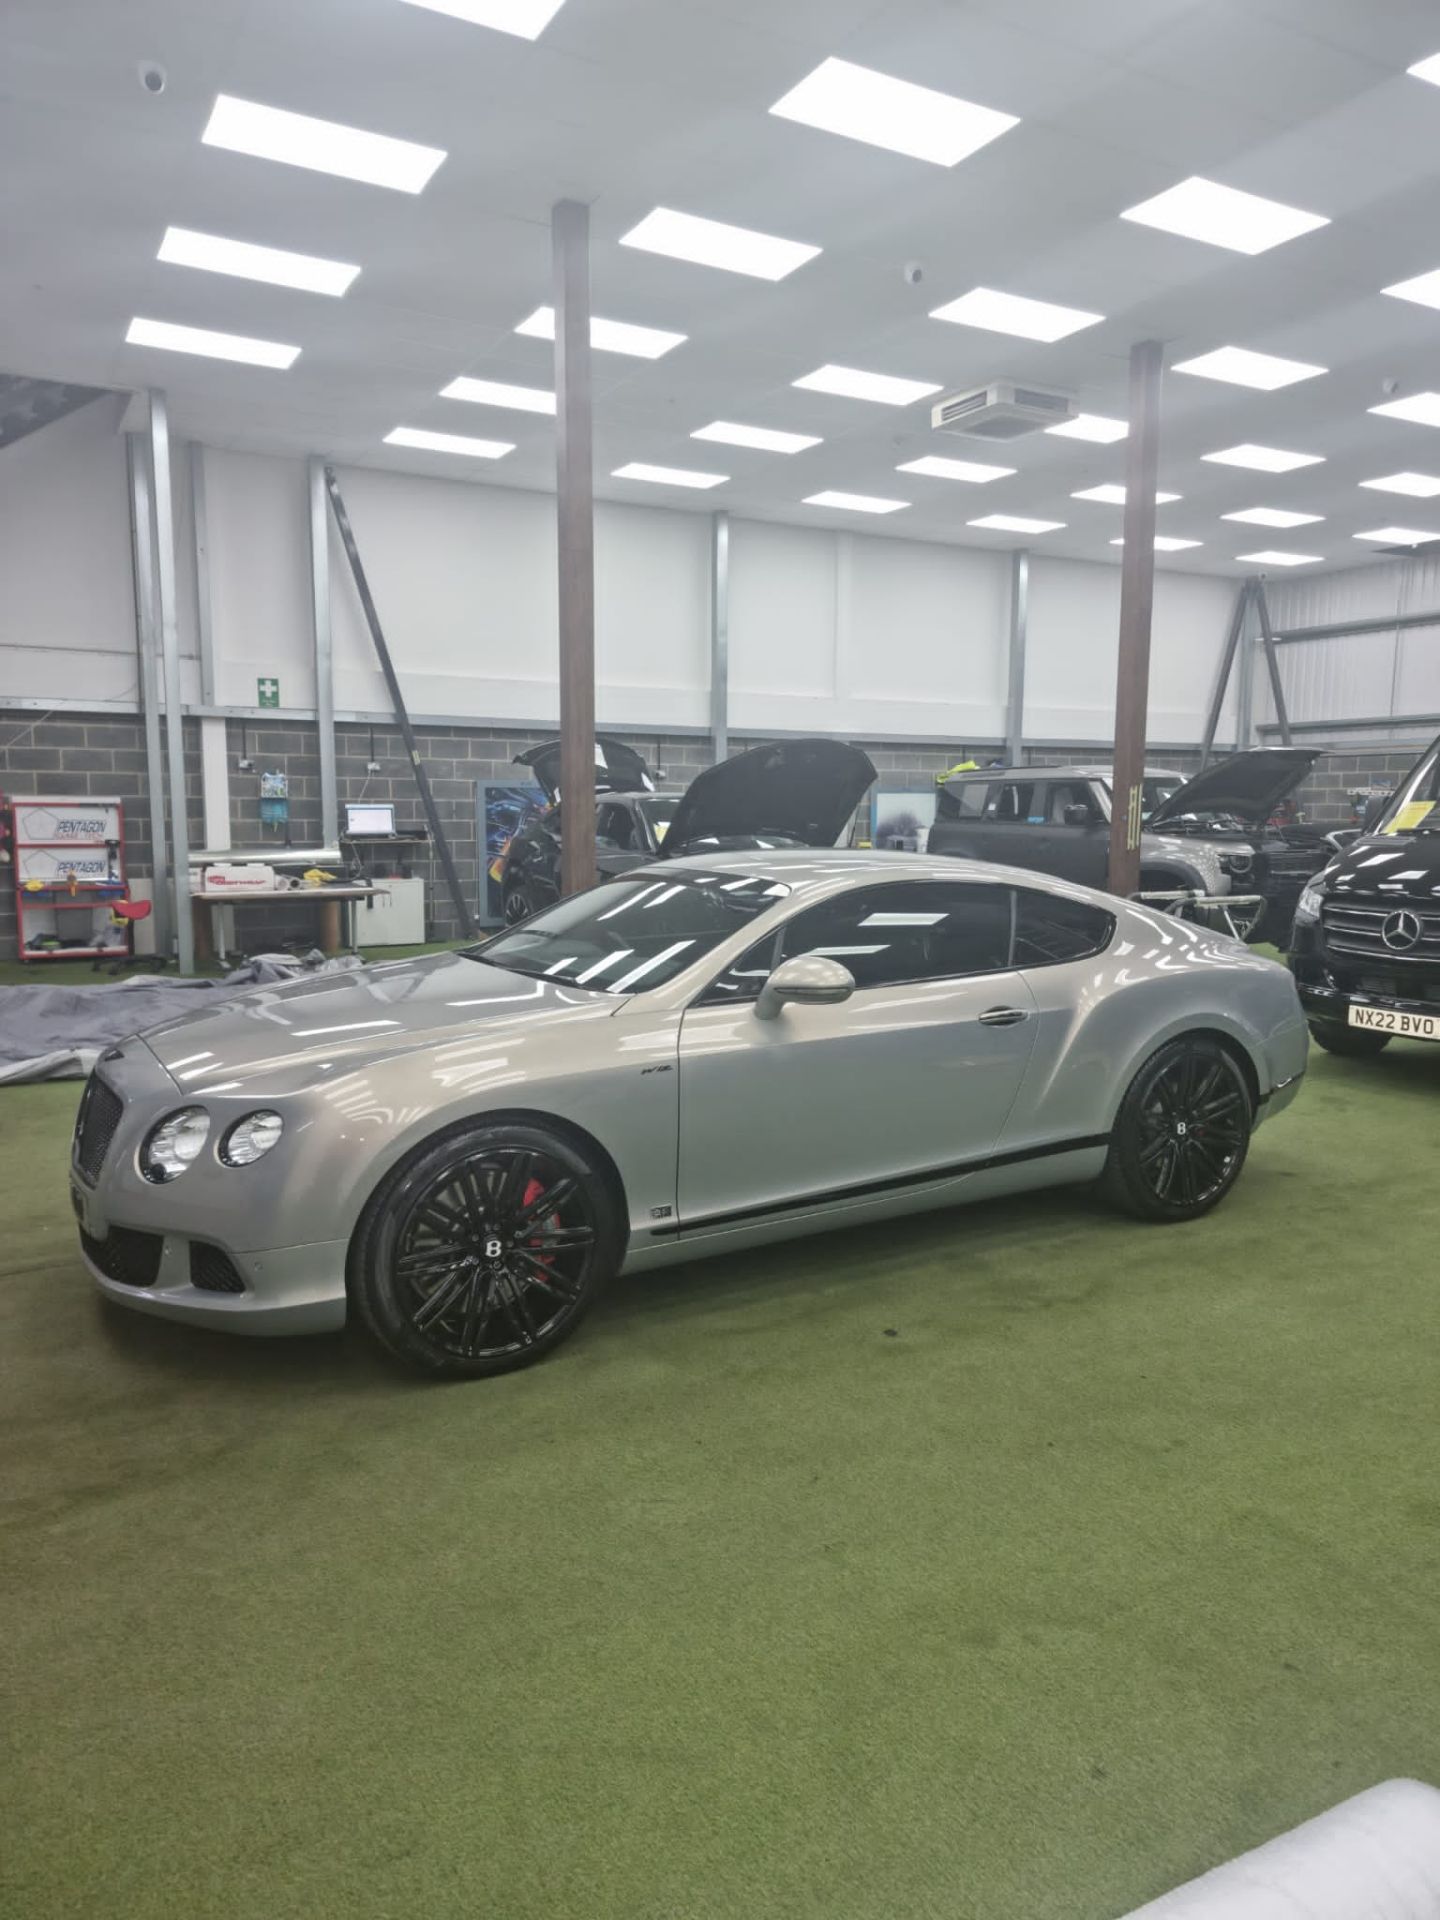 DCL - 2013 BENTLEY CONTINENTAL GT SPEED AUTO GREY COUPE, 56k miles, 626 BHP, 5998 cc PETROL - Image 8 of 16